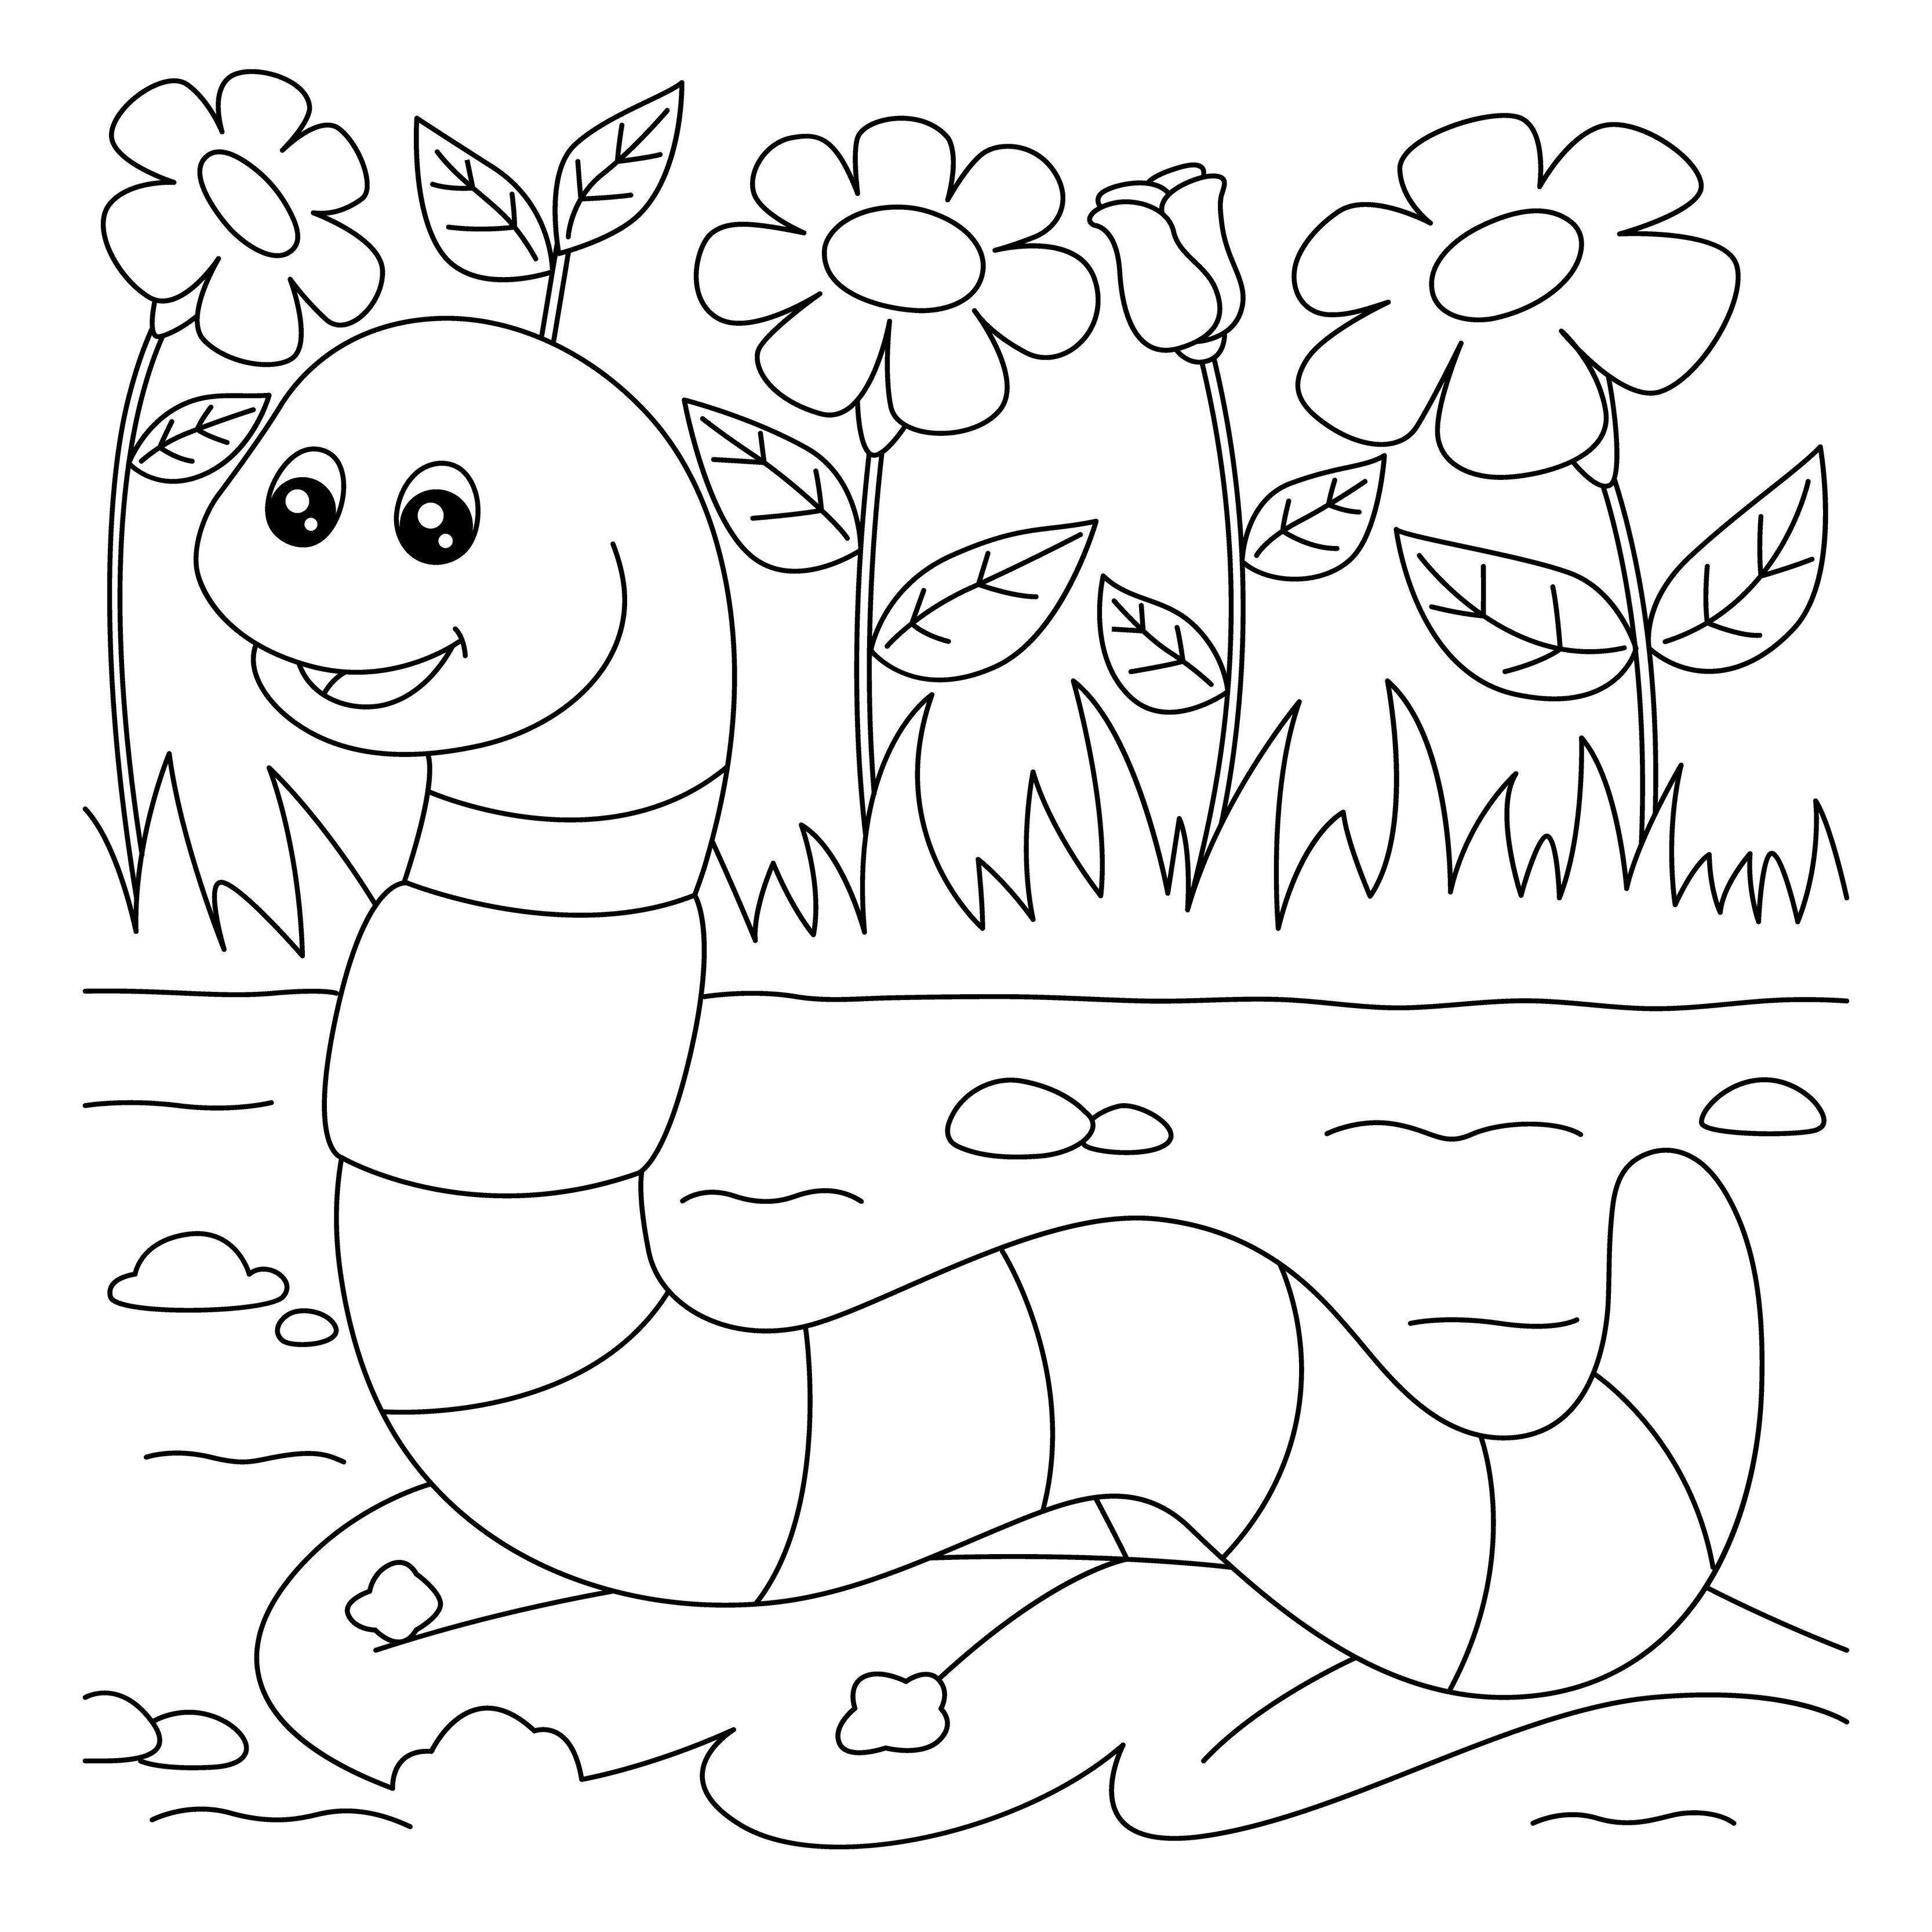 Worm Coloring Page for Kids 20 Vector Art at Vecteezy